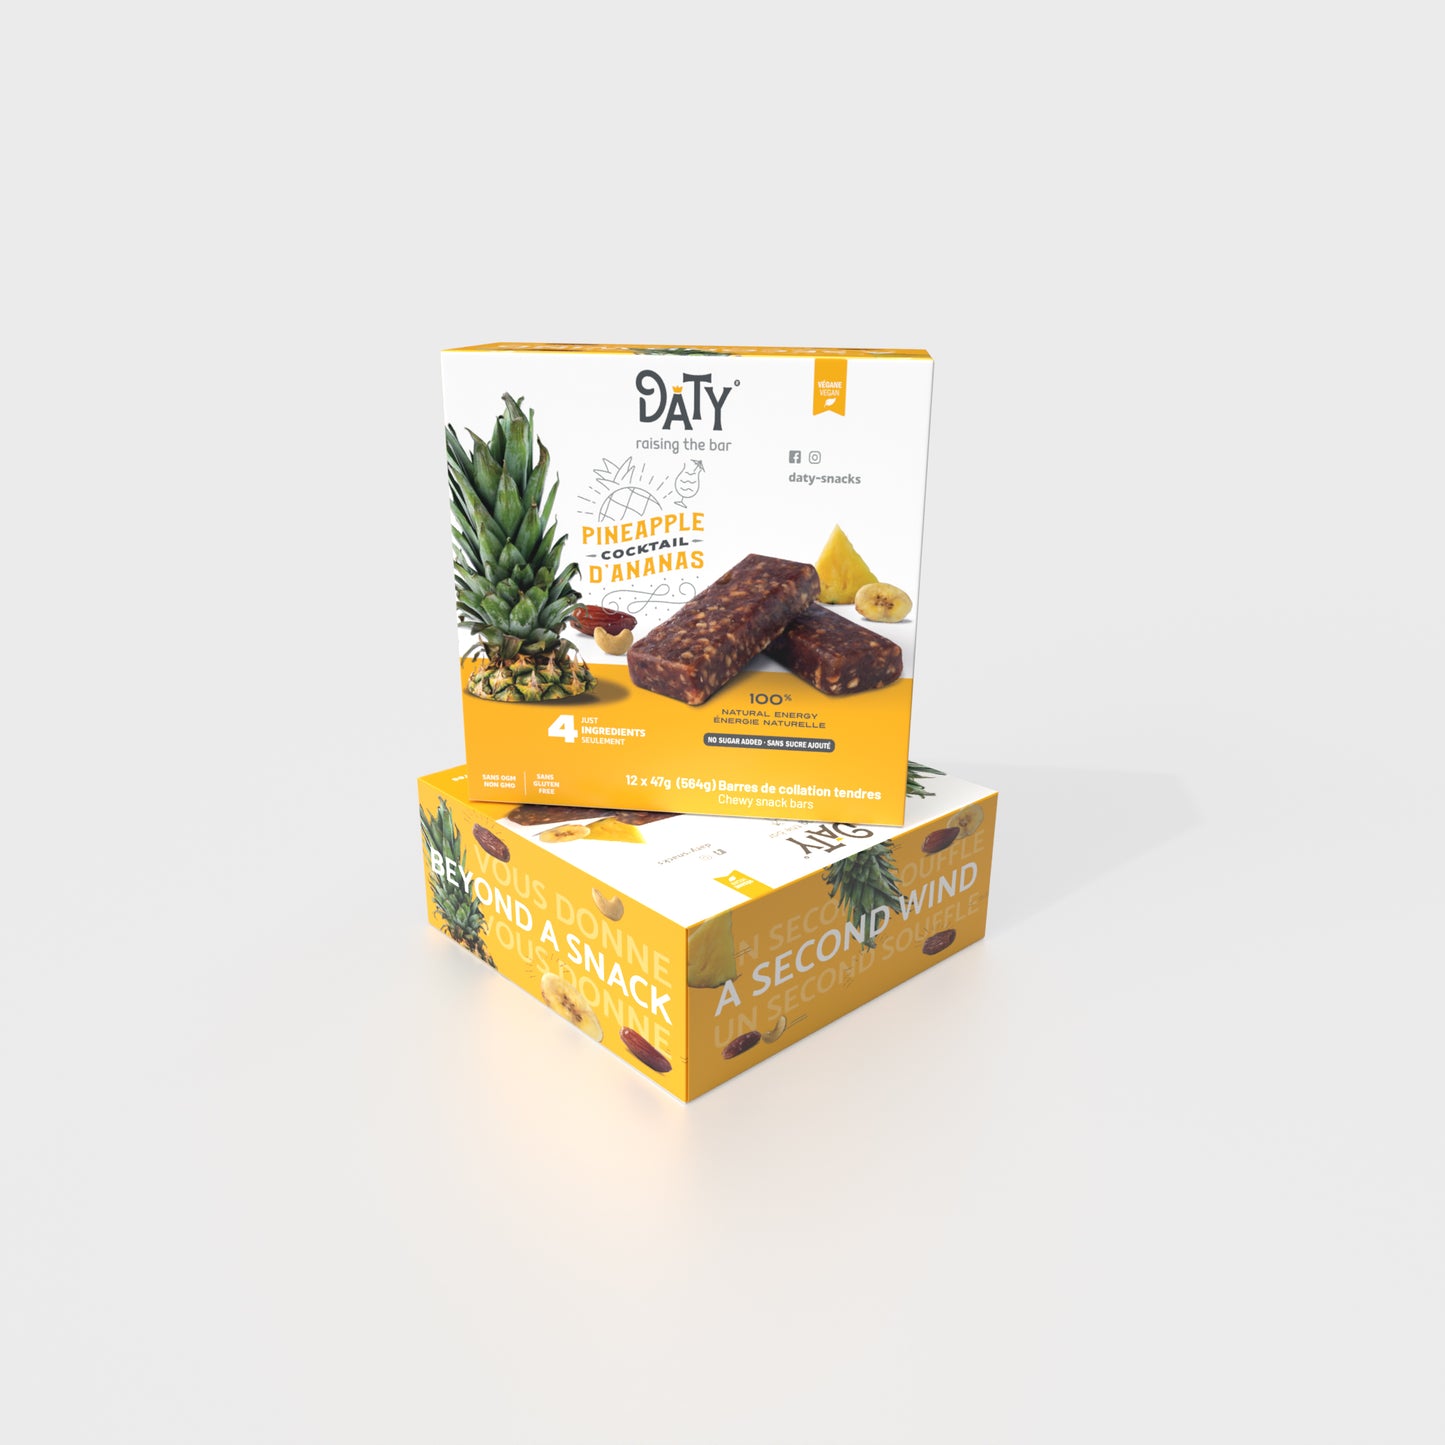 Daty Box- Pineapple Cocktail-12 x 47g